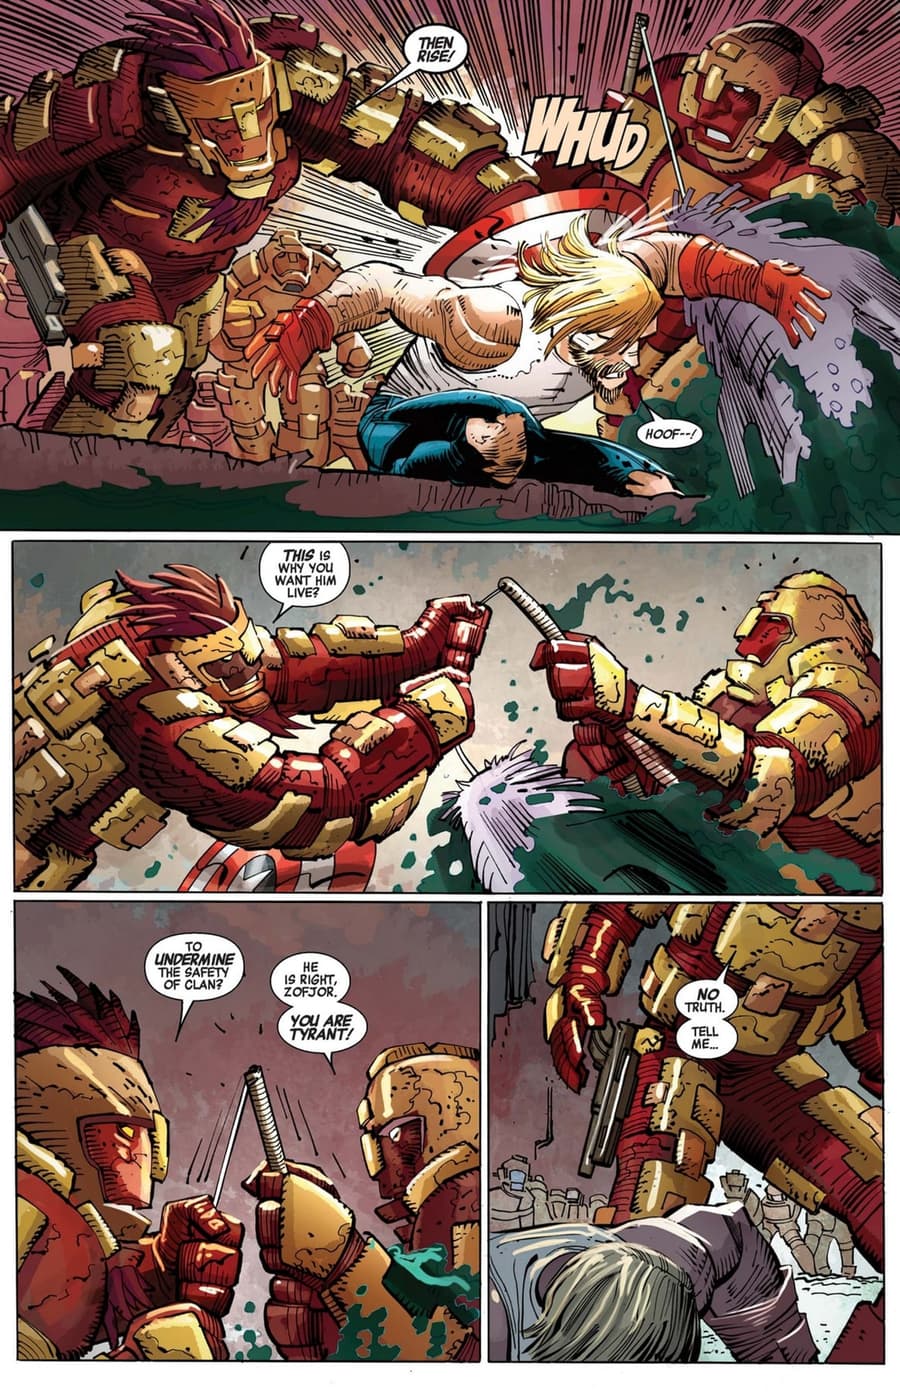 CAPTAIN AMERICA (2012) #3 page by Rick Remender and John Romita Jr.